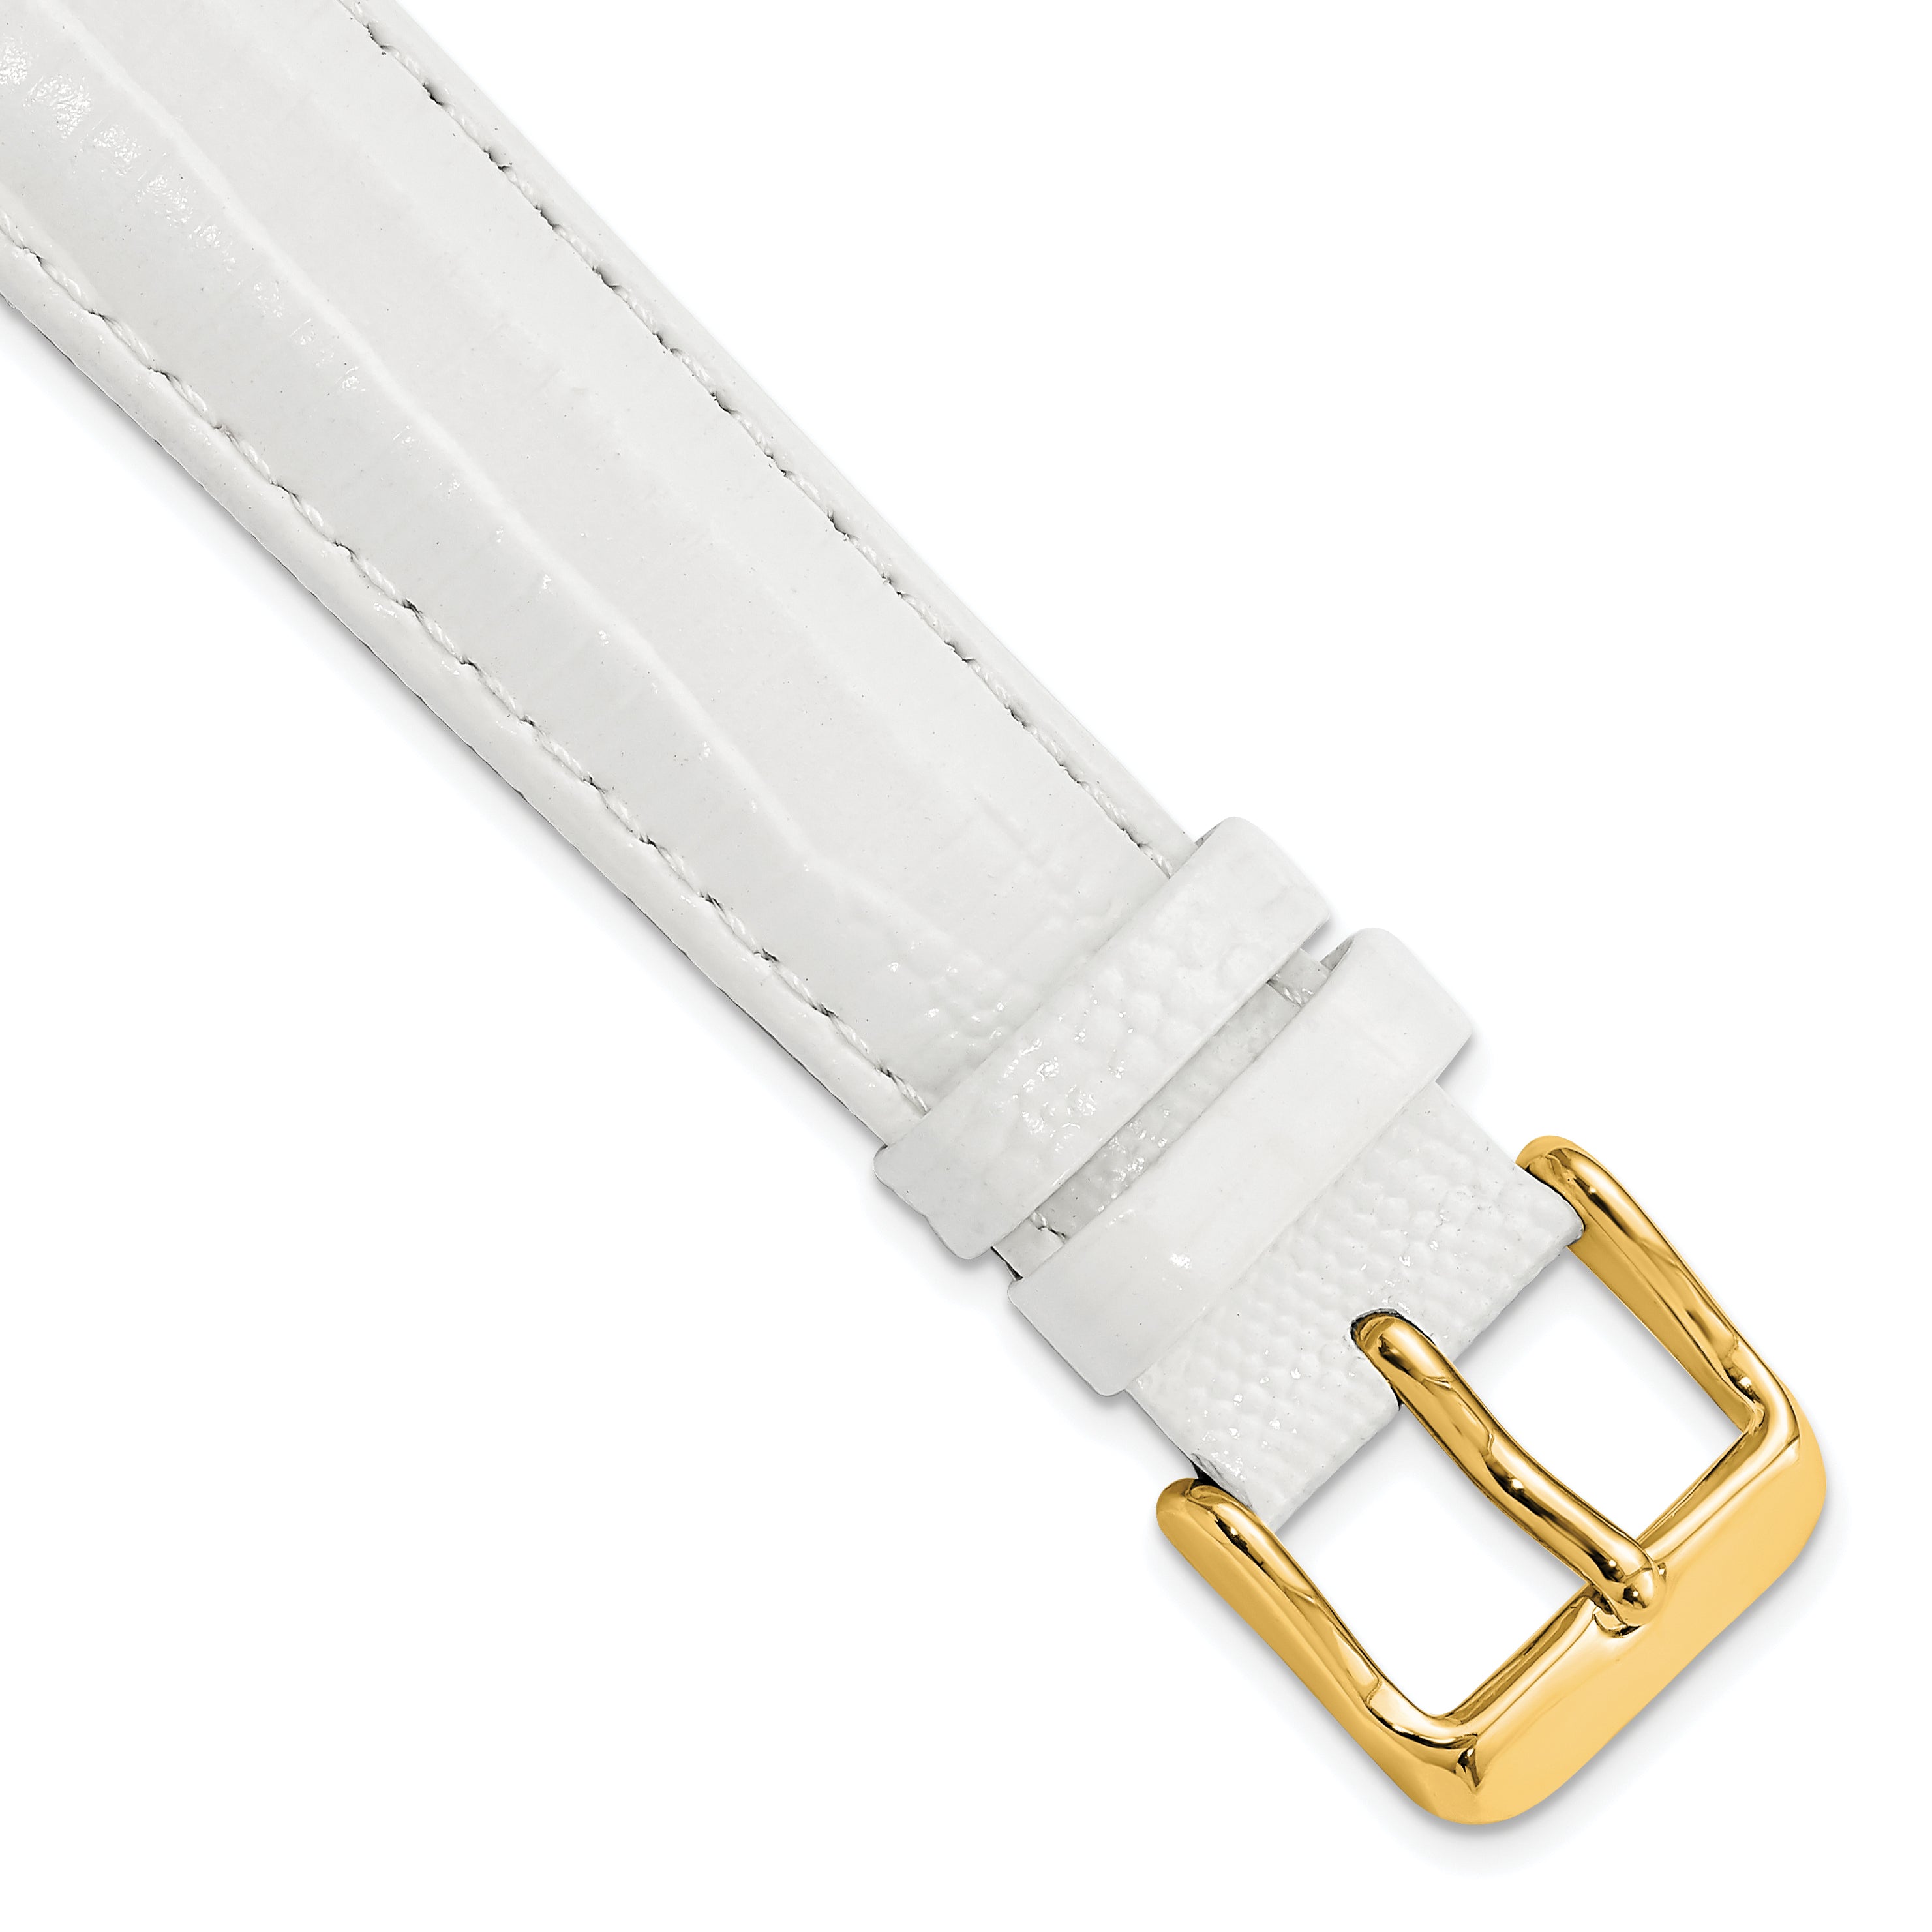 DeBeer 18mm White Teju Liz Grain Leather with Gold-tone Buckle 7.5 inch Watch Band